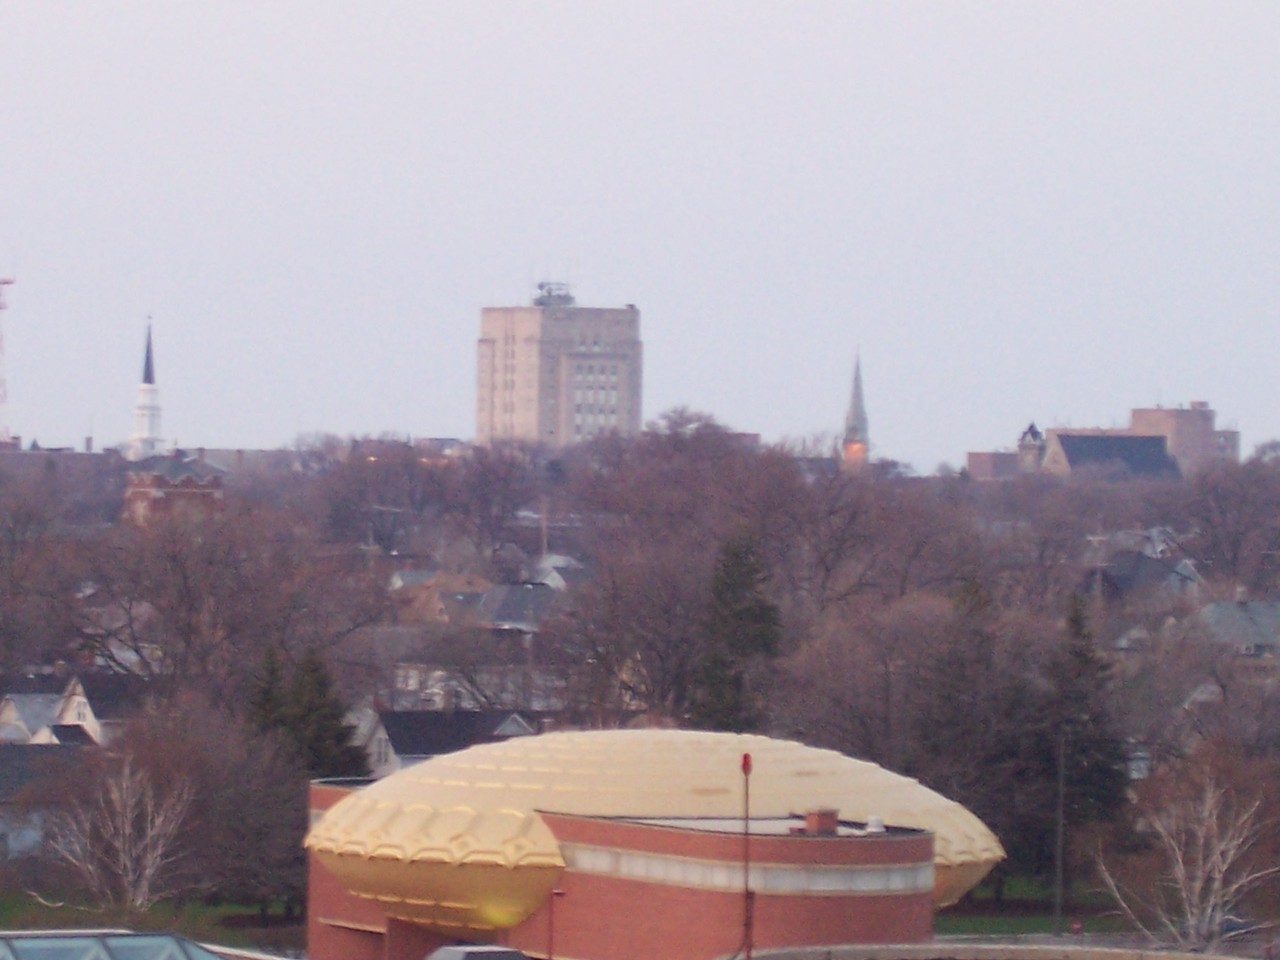 Racine, WI: County Courthouse with Golden Rondelle in foreground